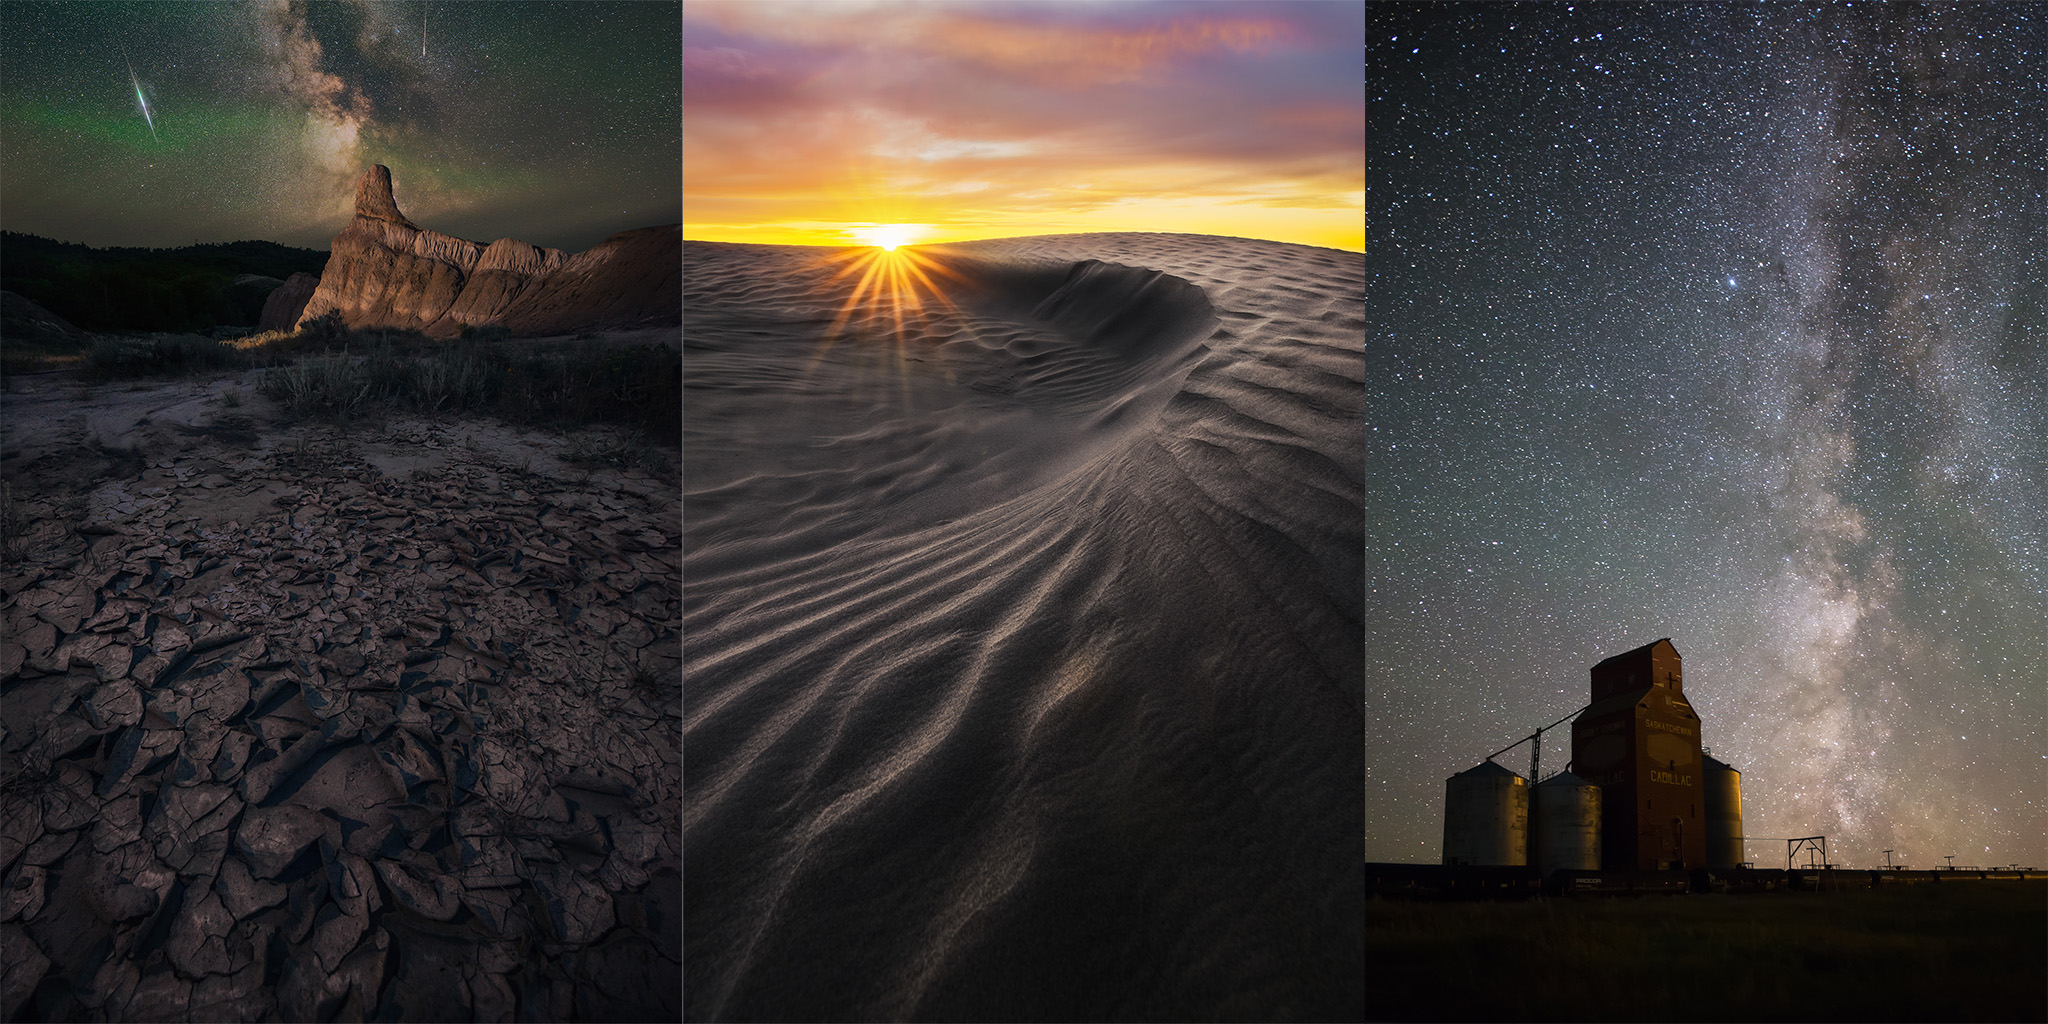 Collage of photos for a night photography workshop around the persied meteor shower. Photos are of the night sky in Saskatchewan